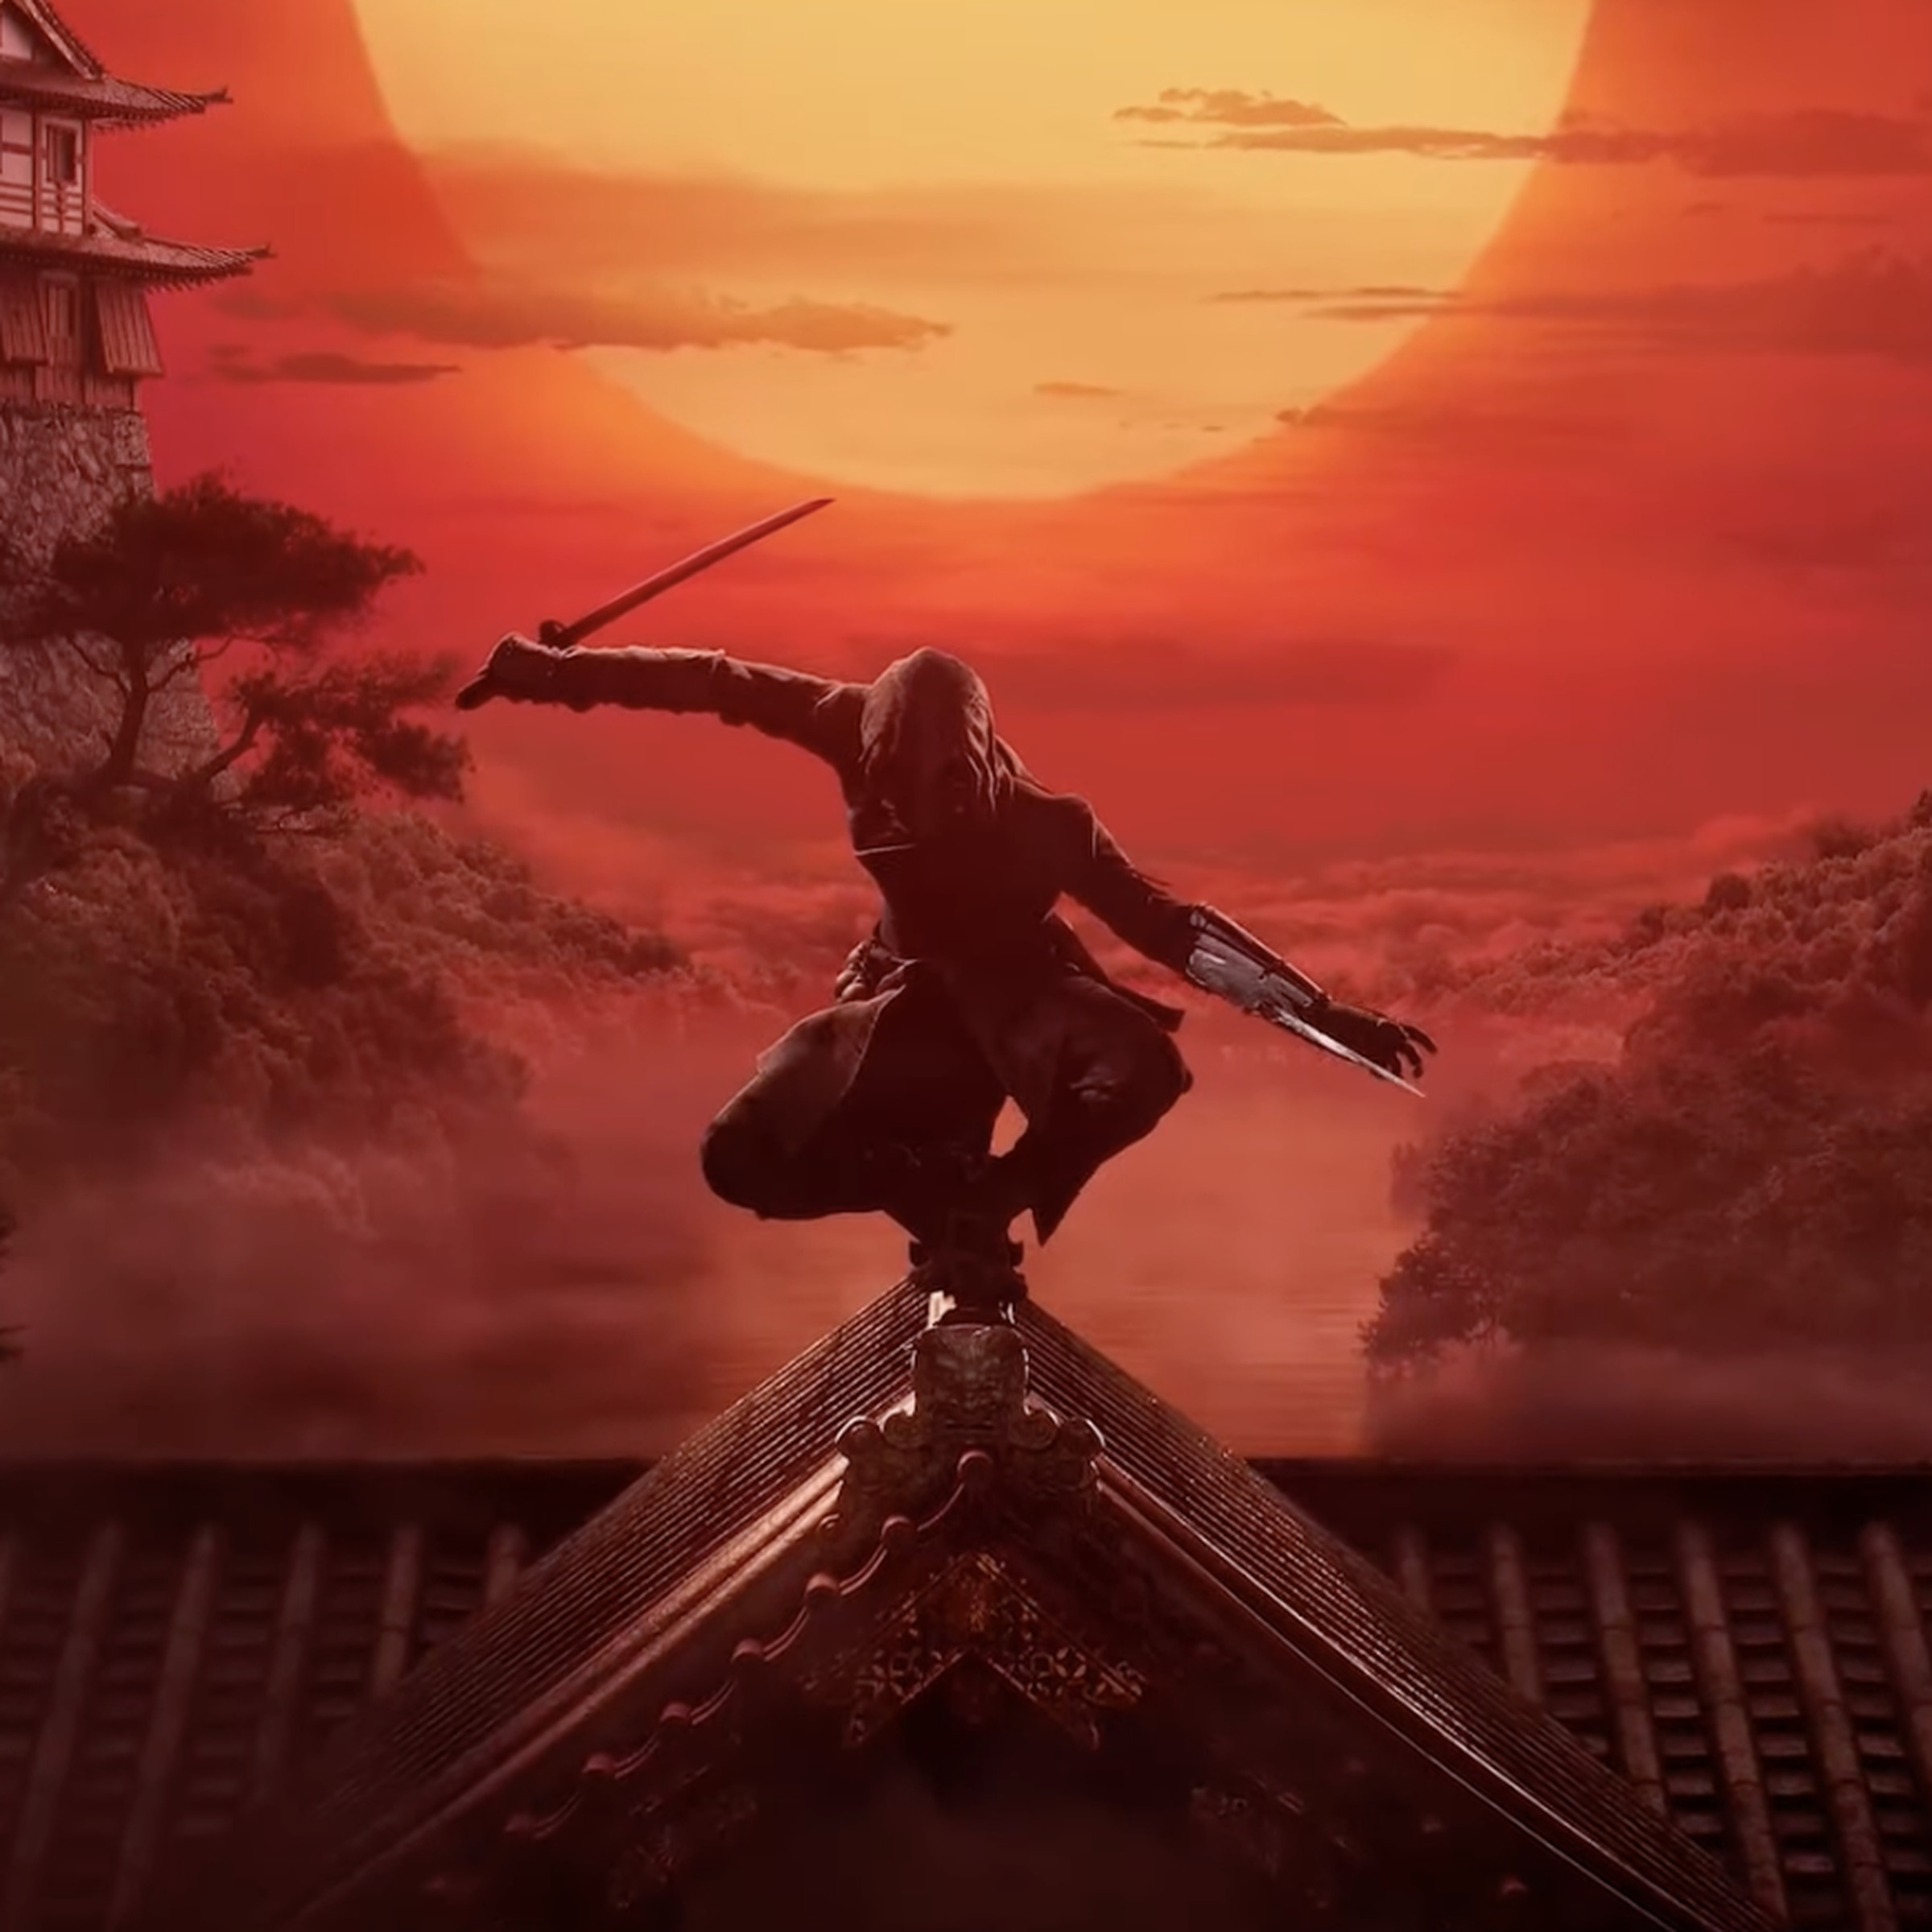 Key art from Ubisoft’s next Assassin’s Creed game, Assassin’s Creed Shadows featuring a ninja brandishing a sword and a hidden blade perched on a Japanese temple set against a red sky and blazing sun.